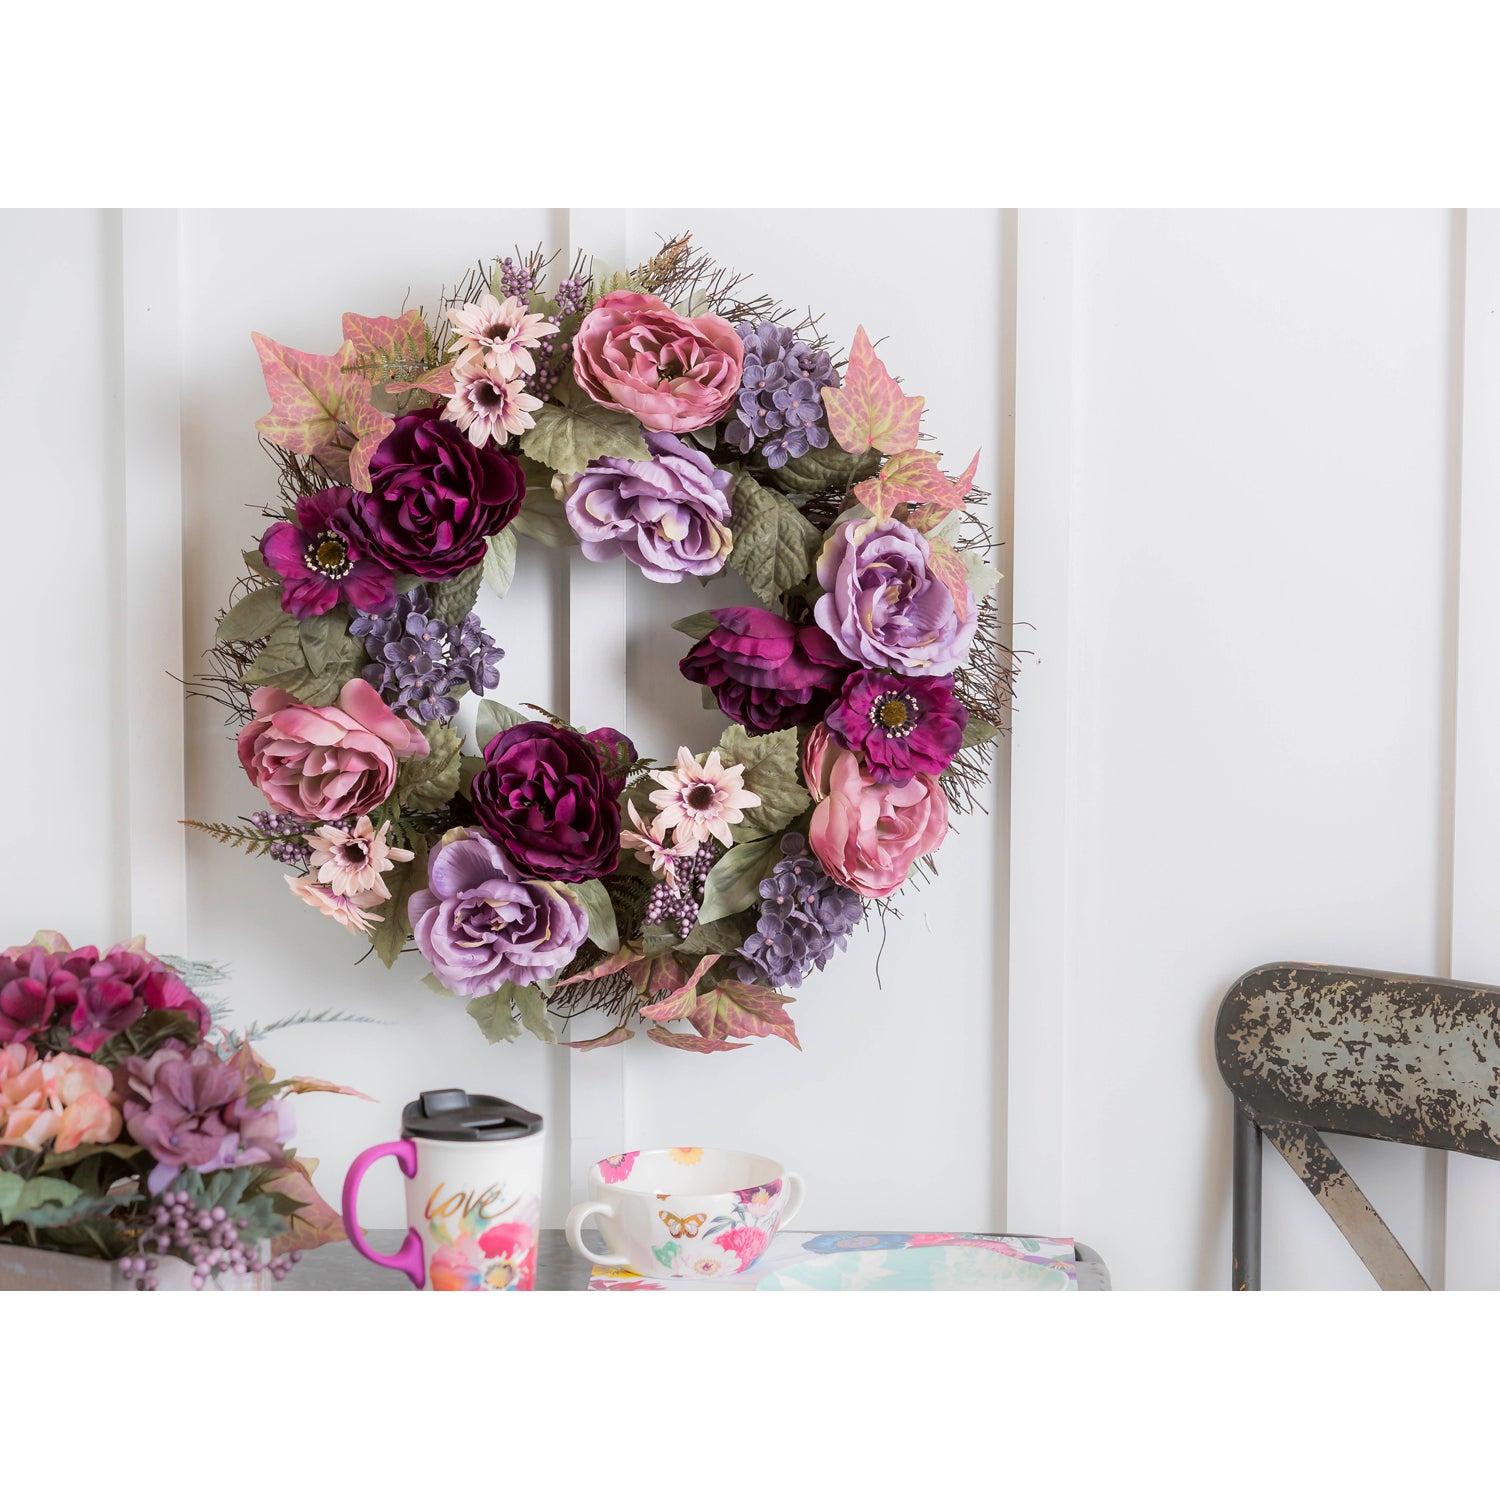 Vine Wreath with Roses, Hydrangeas, and Berries